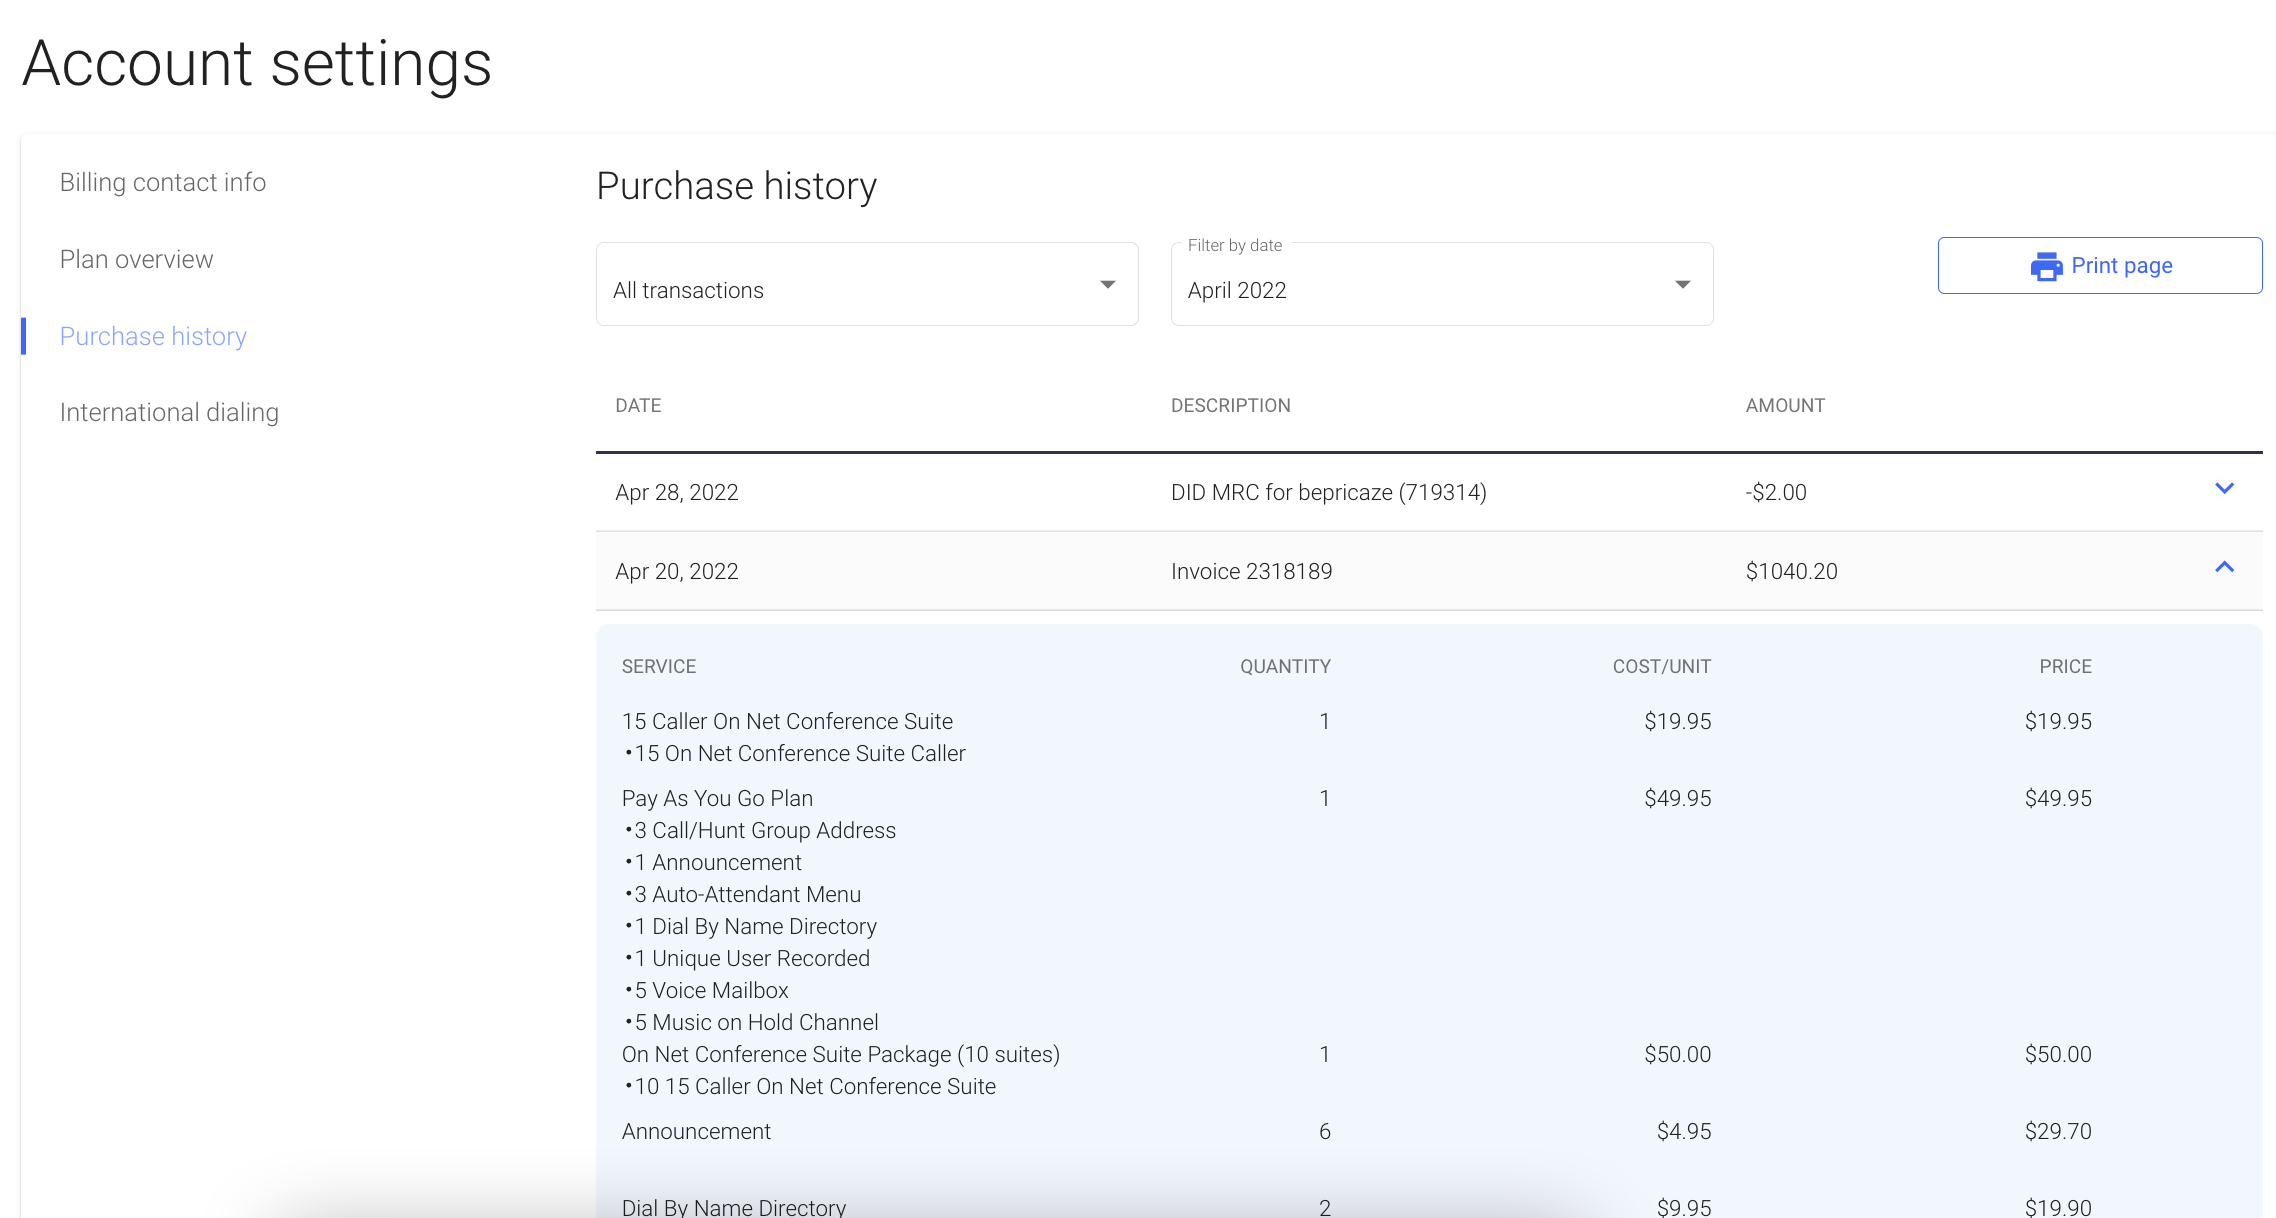 Screenshot of the purchase history section in the OnSIP softphone app.